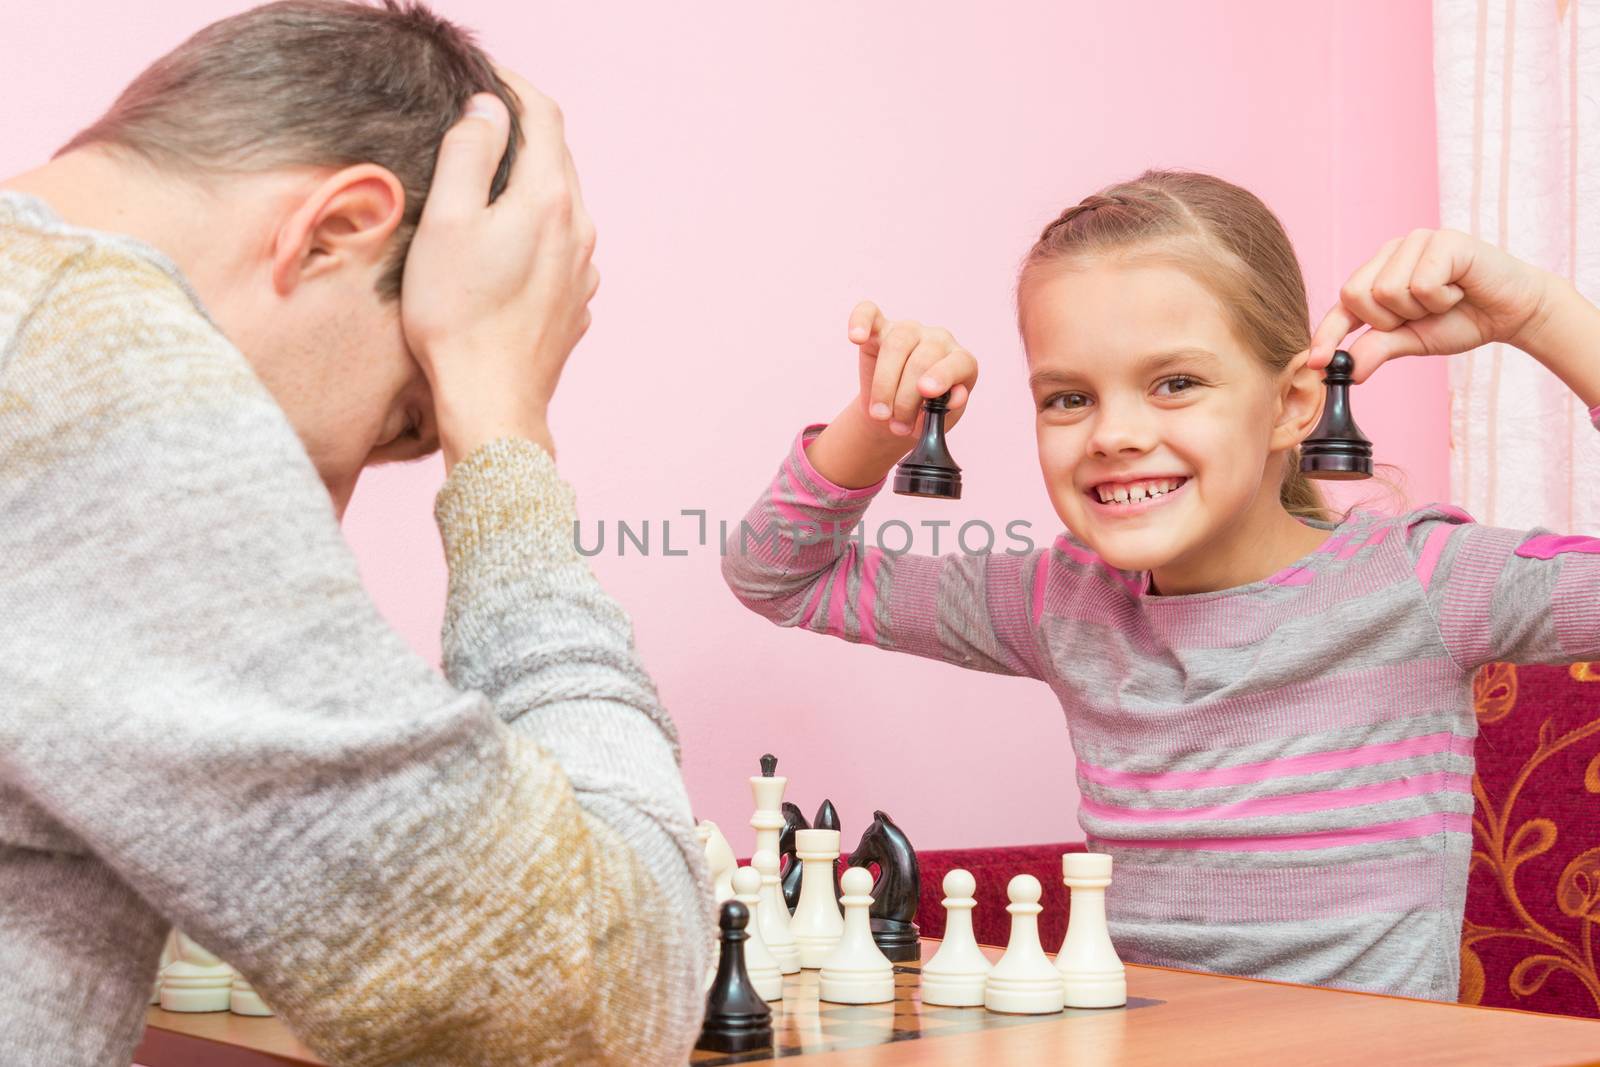 My daughter is happy that the Pope played two pawns and win in chess